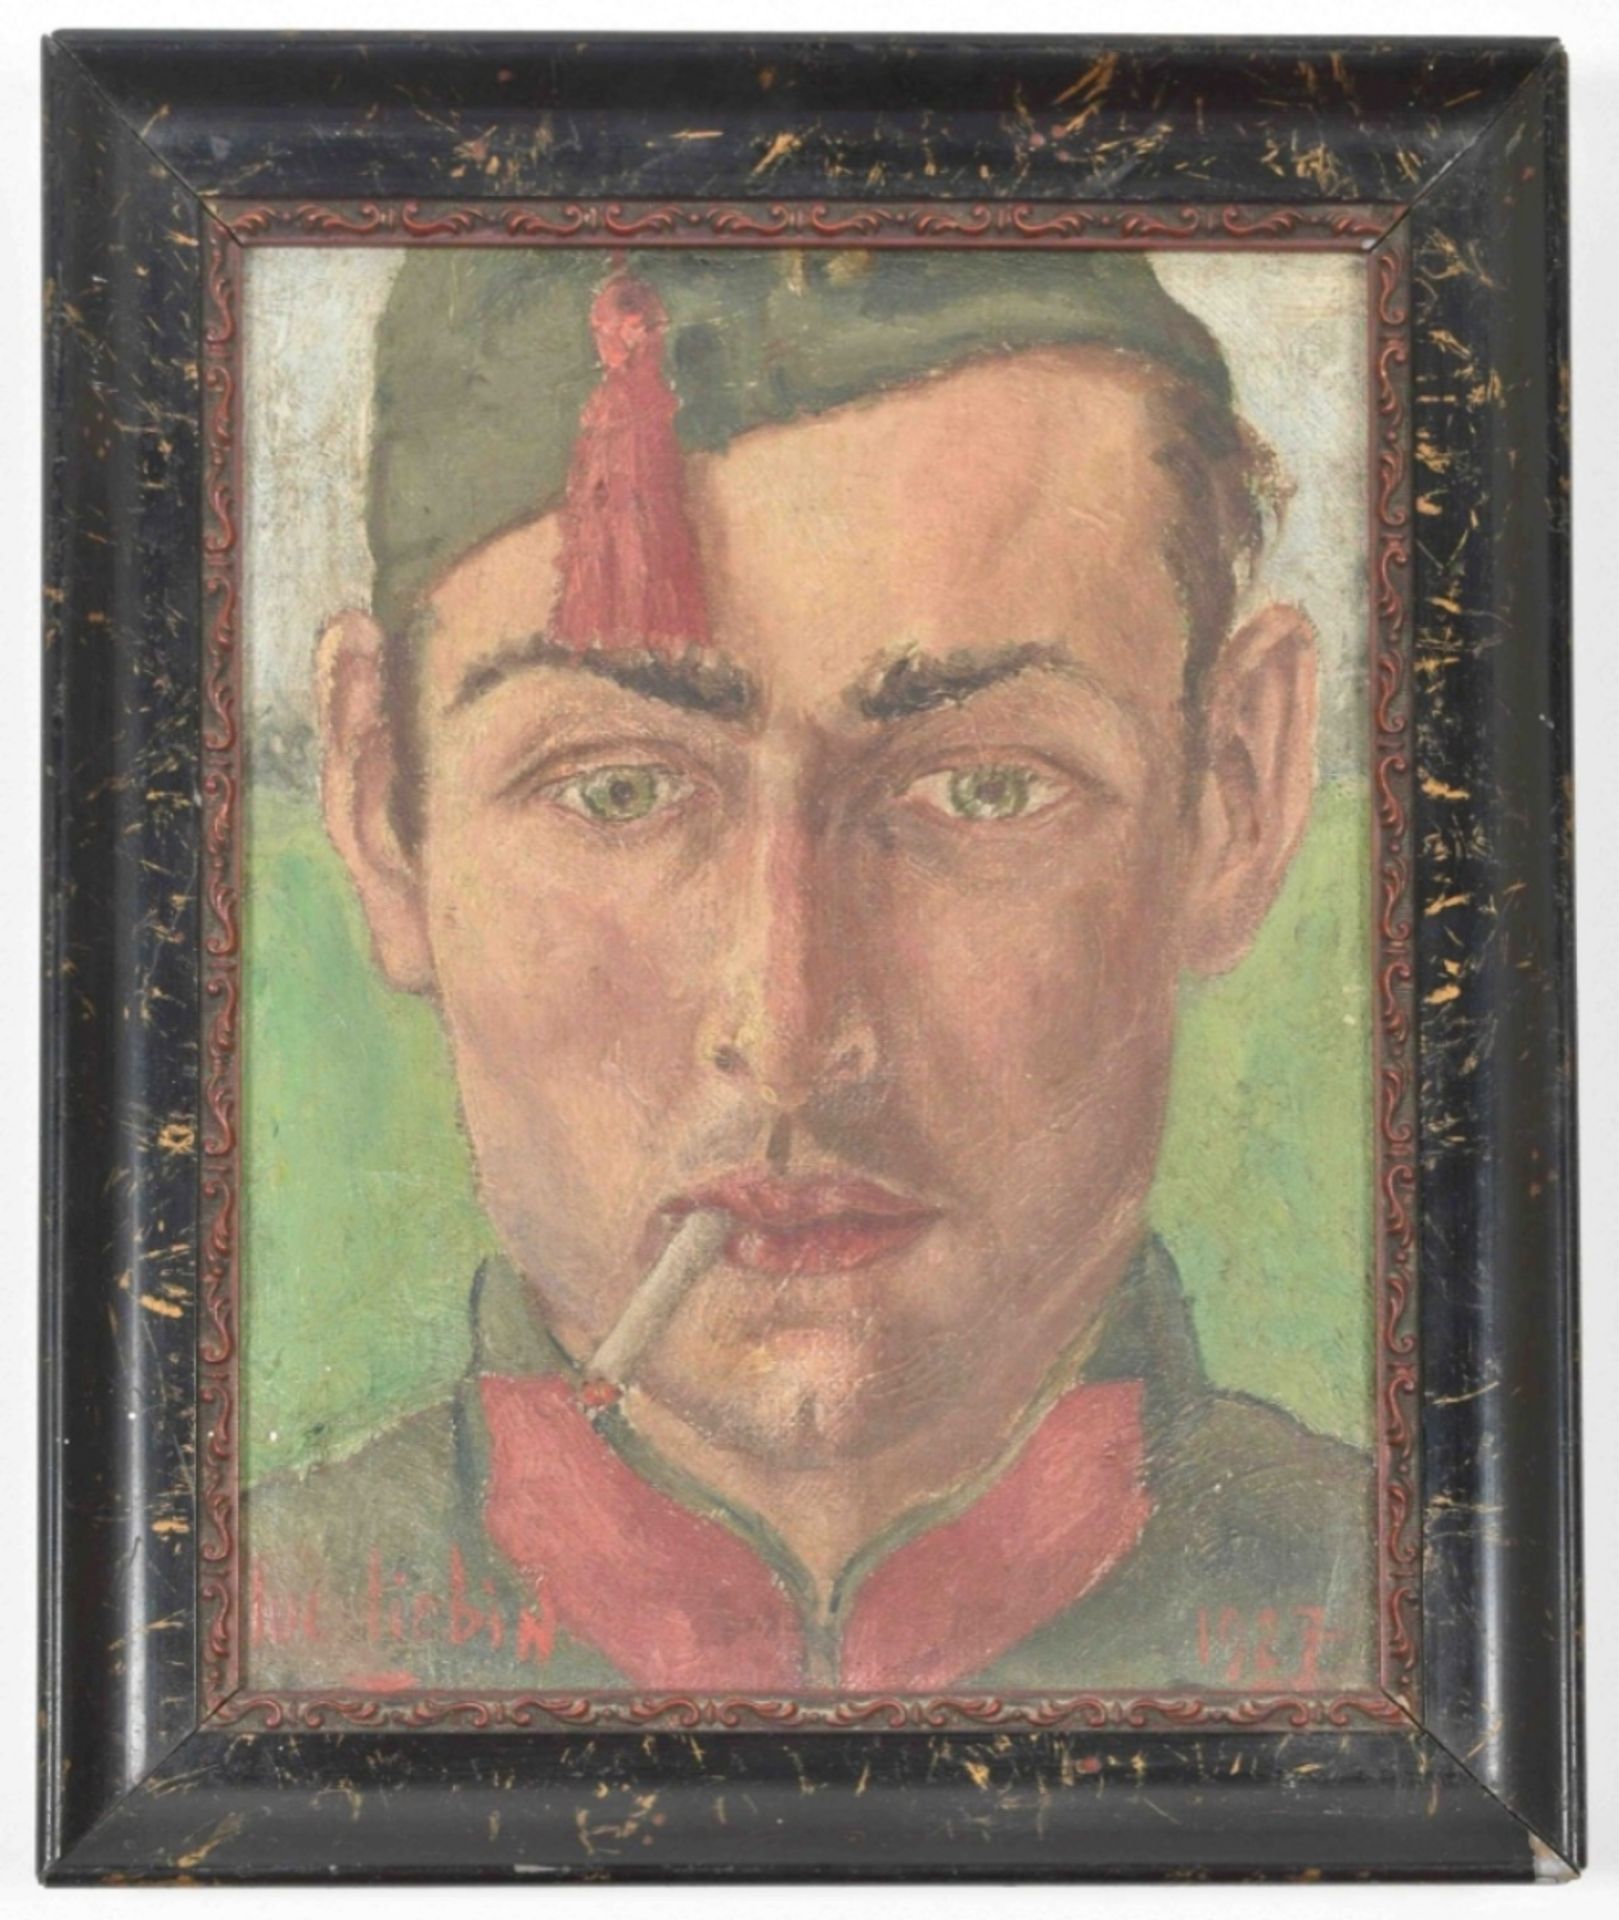 Luc Liebin (20th cent.). "Portrait of a young soldier smoking a cigarette"